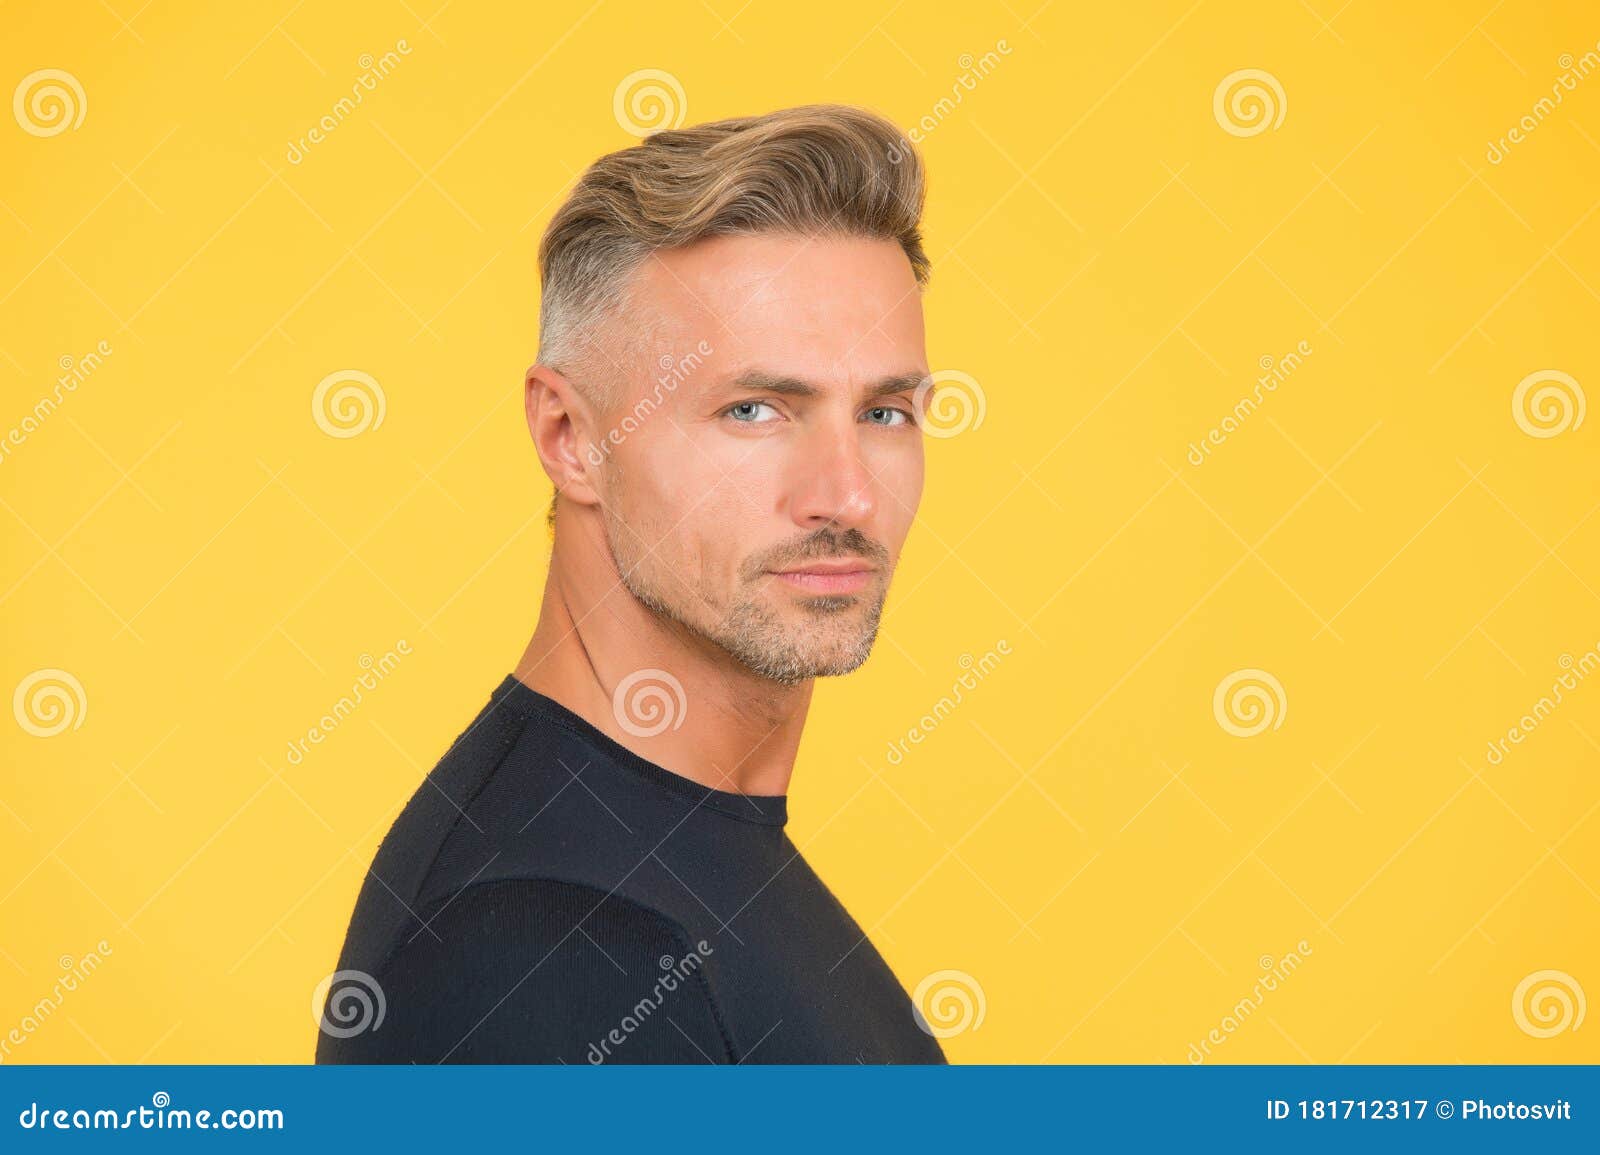 Trendy Short Haircut. Middle Aged Man with Stylish Hair. Hair Salon. Mature  Model in Casual Style. Barbershop Stock Image - Image of care, haircare:  181712317